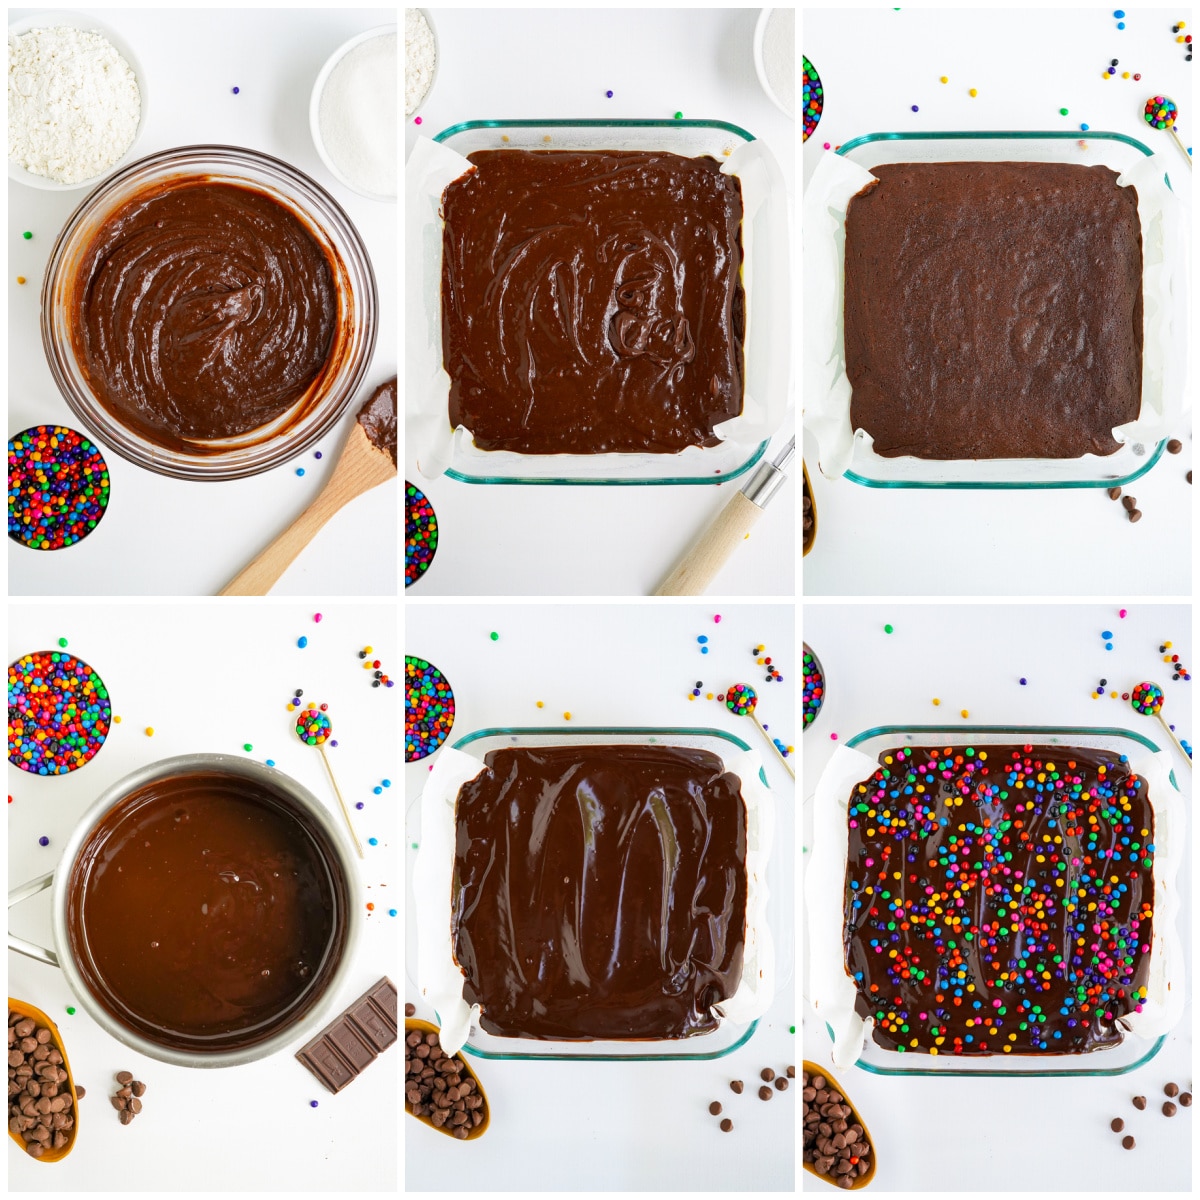 Step by step photos on how to make a Cosmic Brownie Recipe.